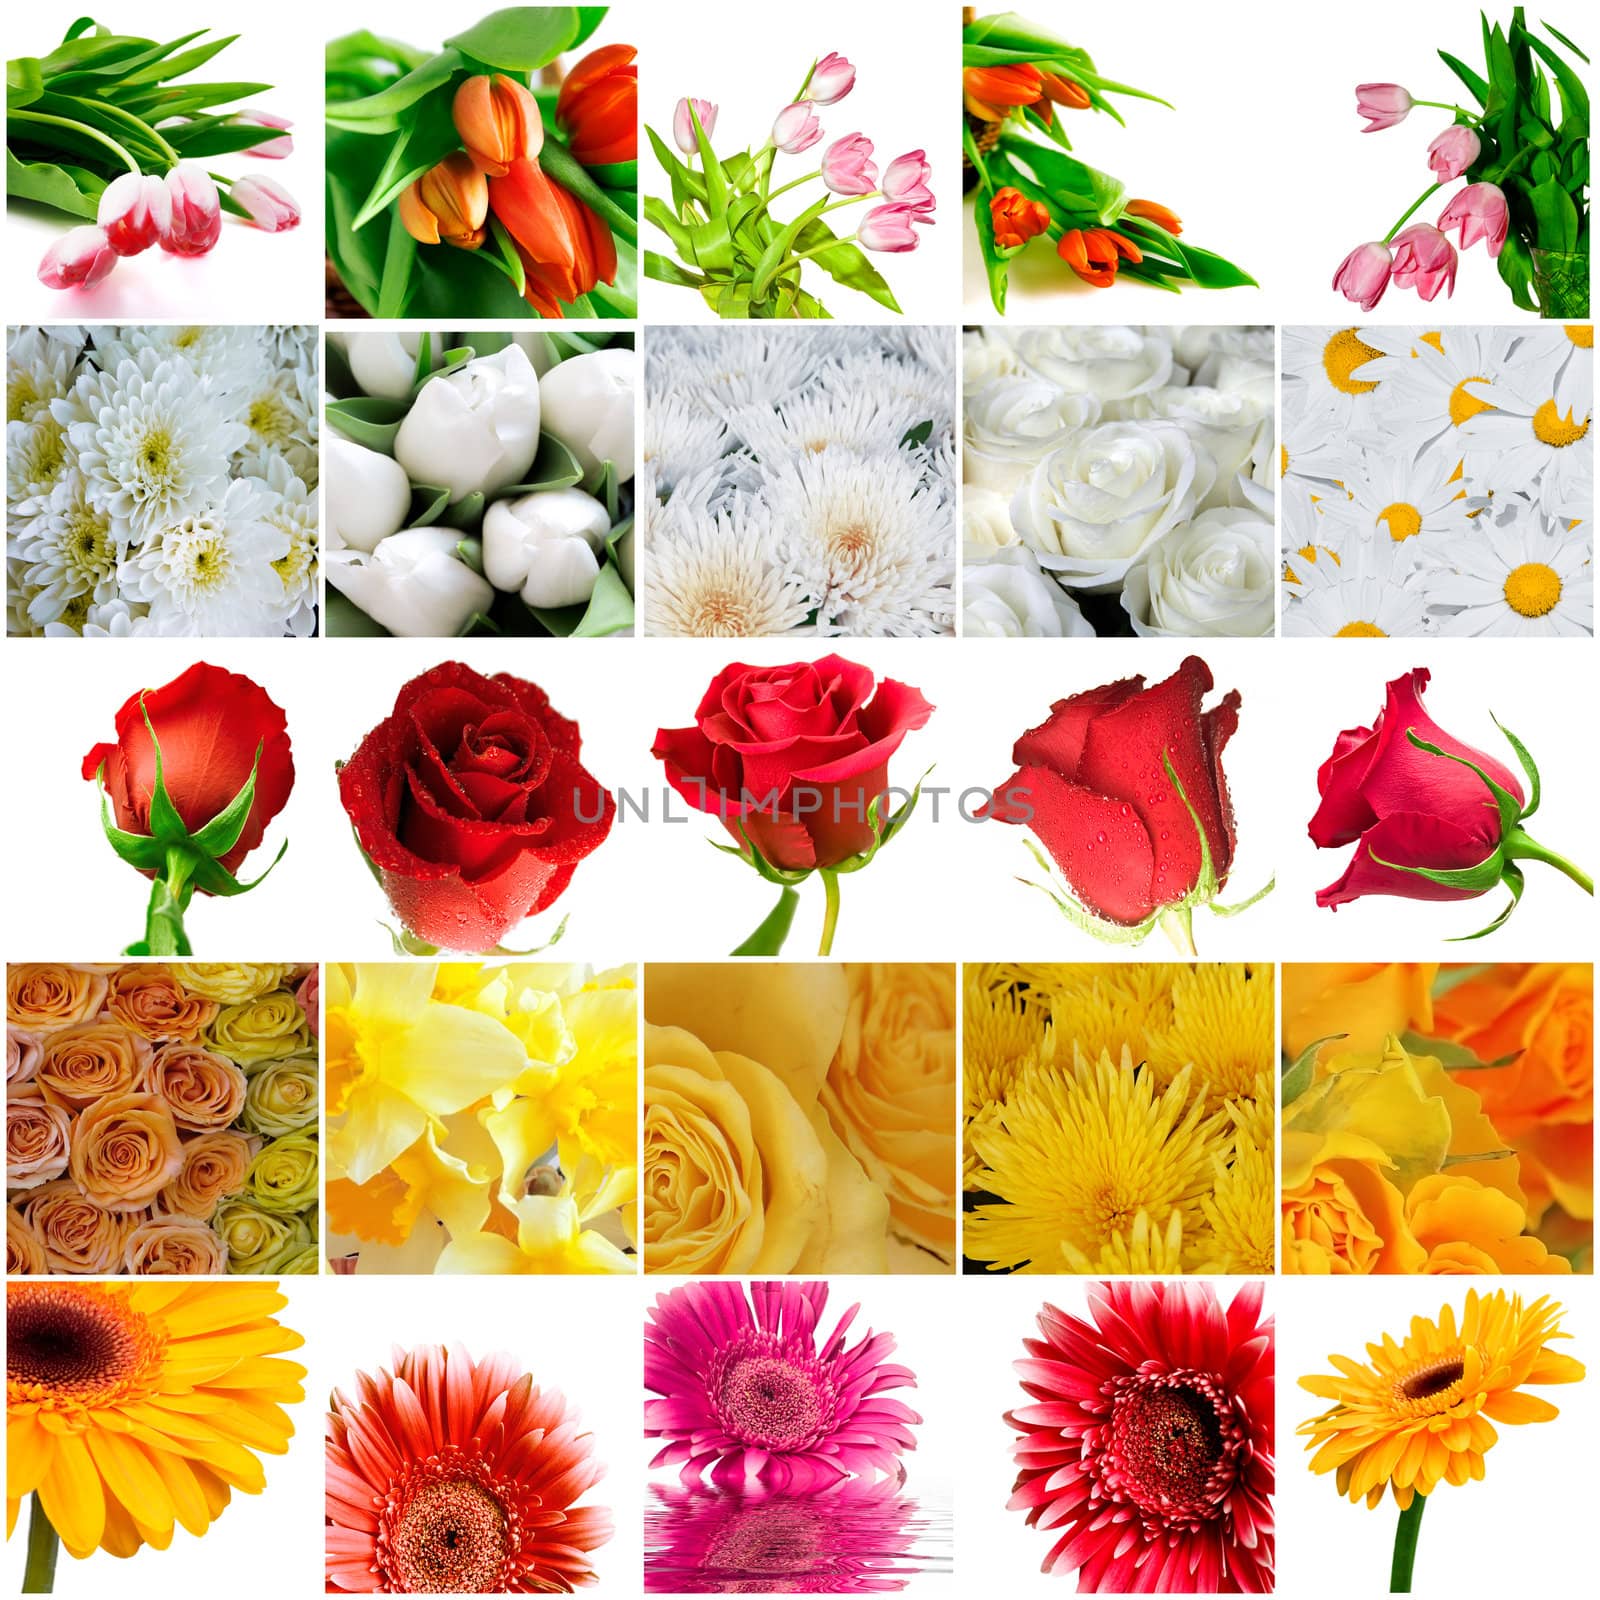 Many beautiful bright flowers on a white background by Serp